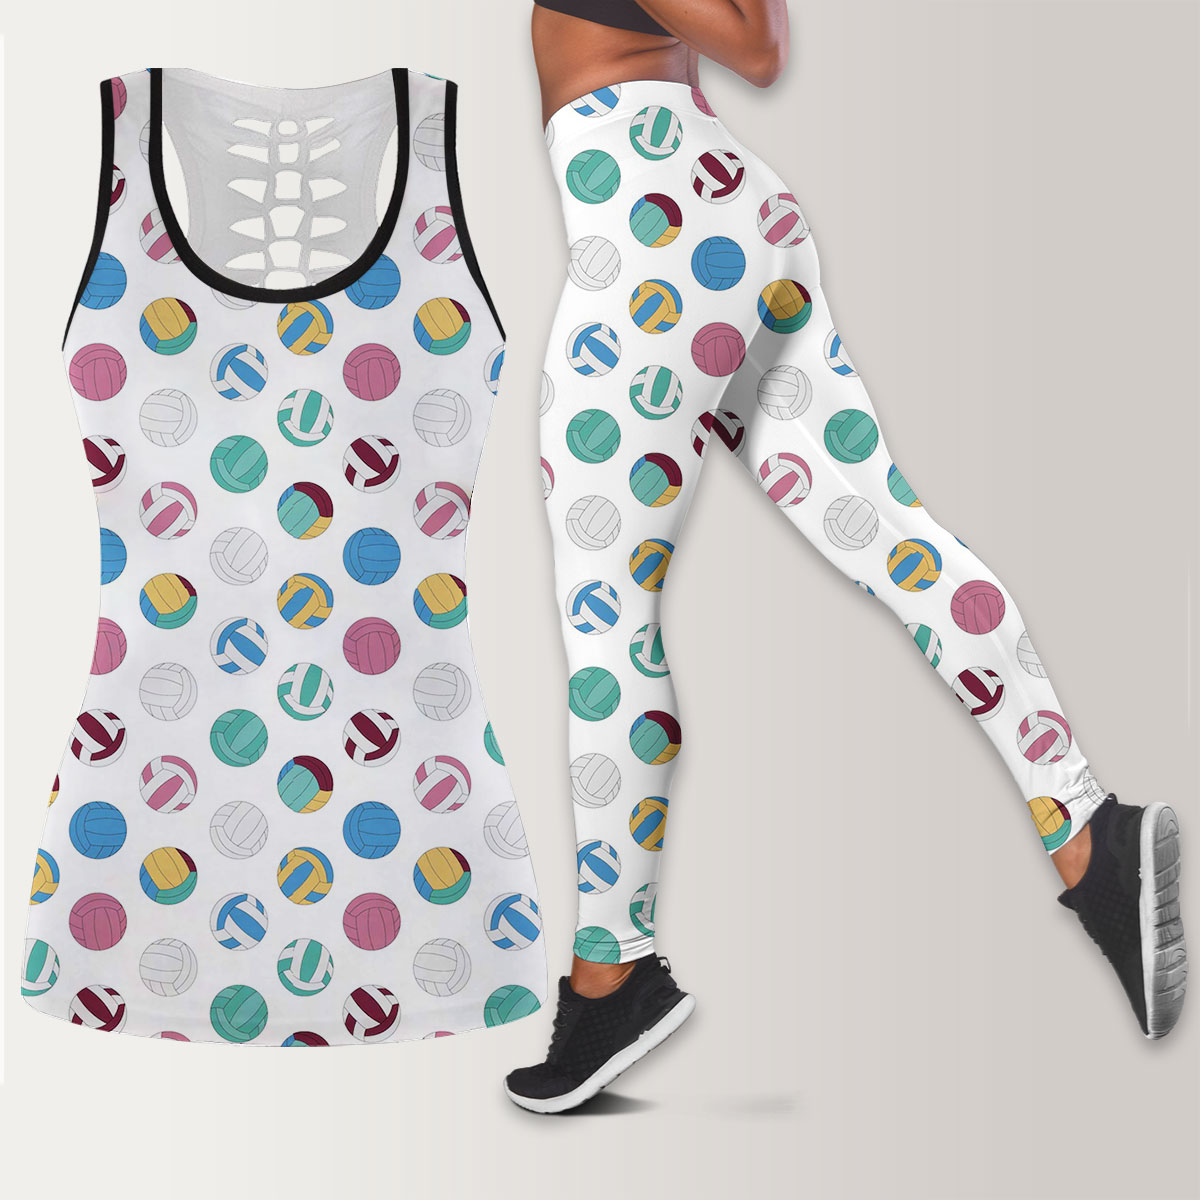 Colorful Volleyball Legging Tank Top set